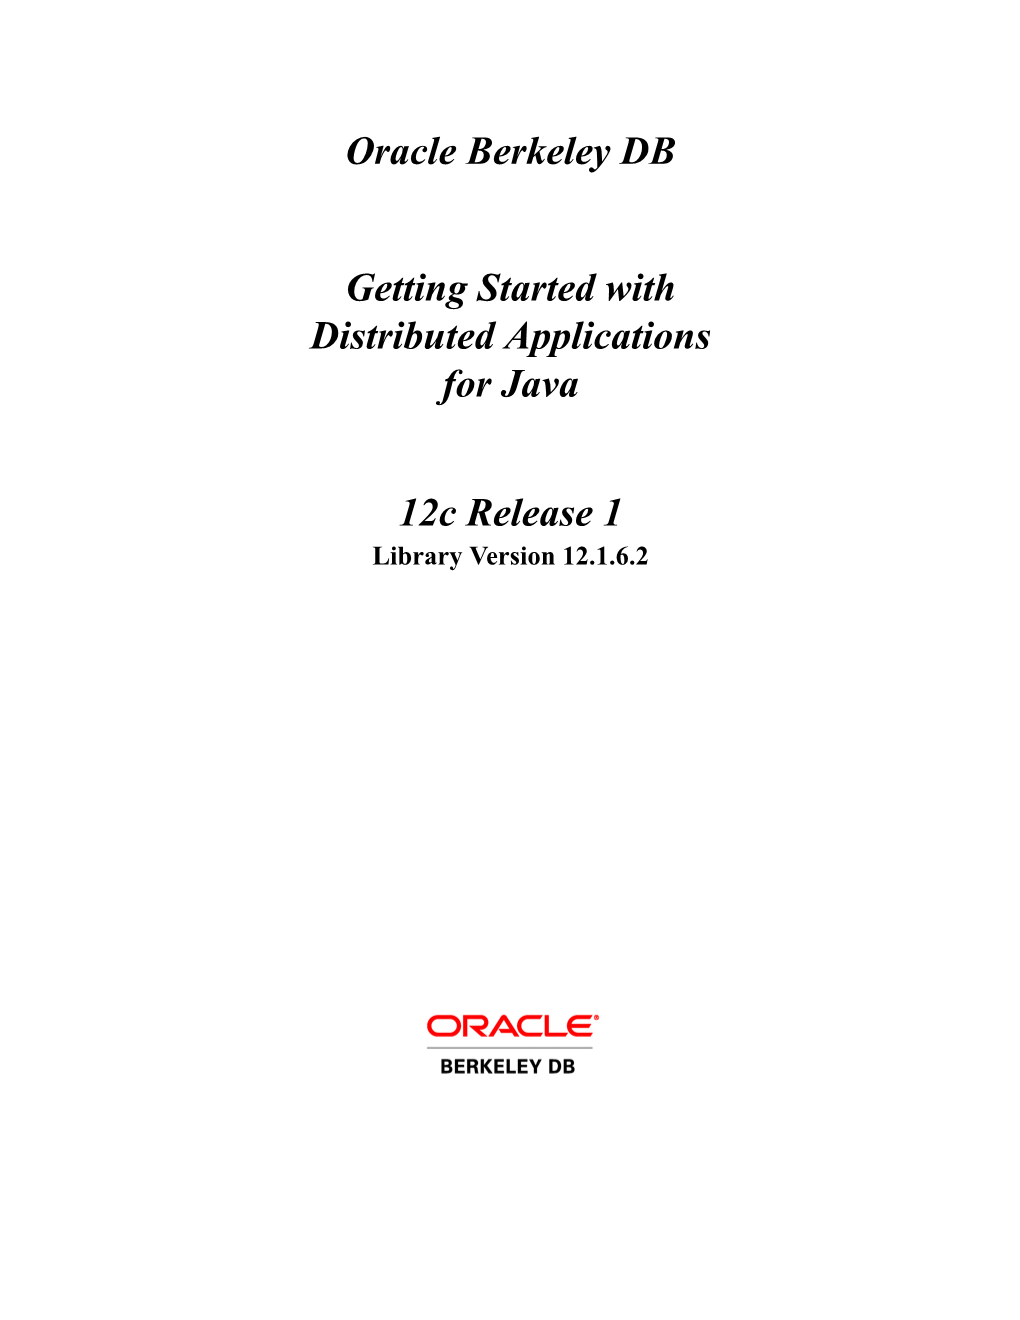 Oracle Berkeley DB Getting Started with Distributed Applications For